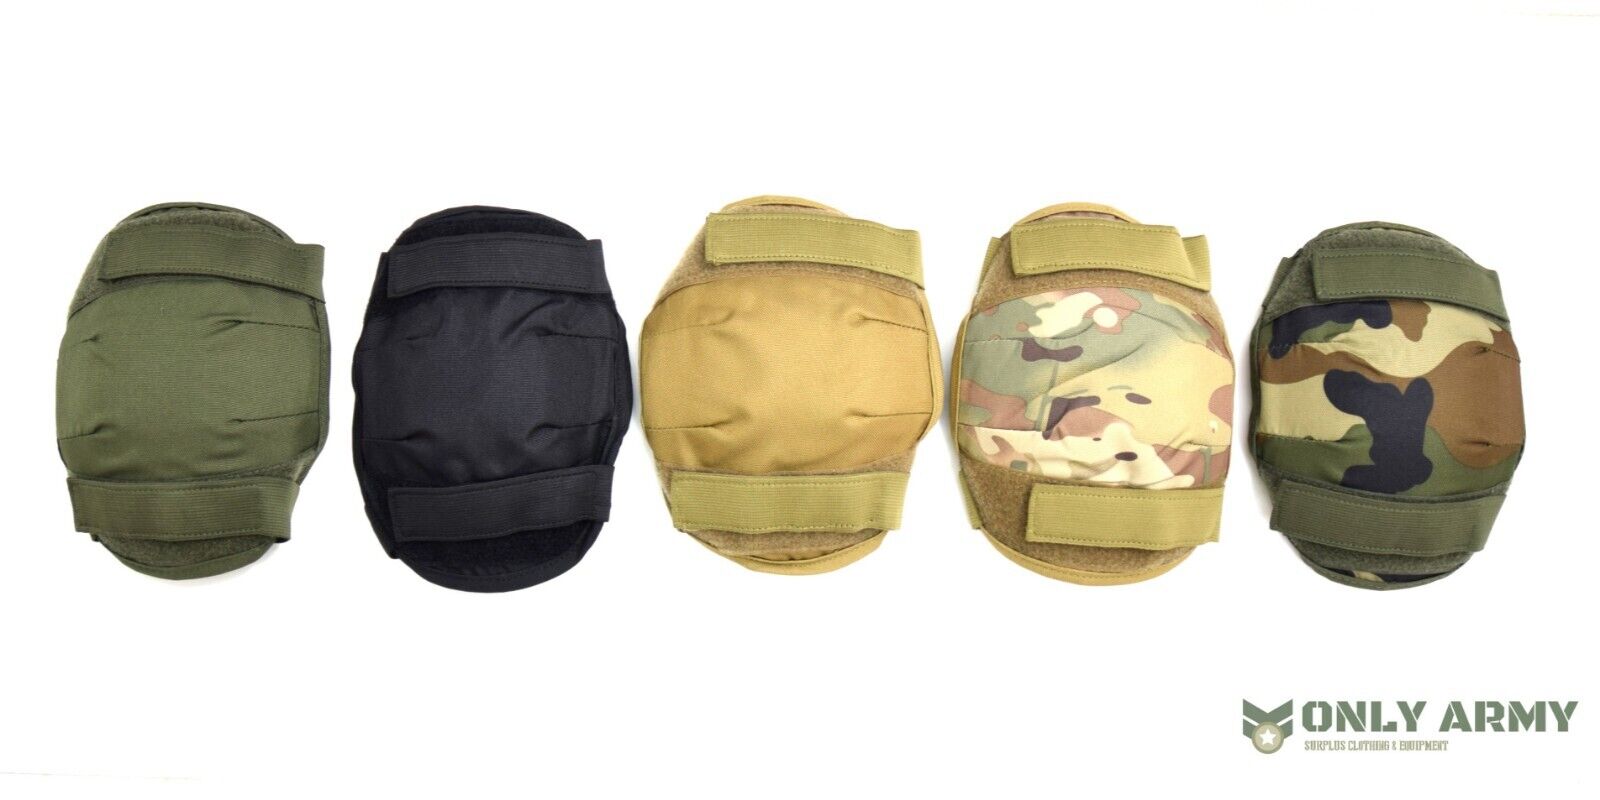 British Army Style Knee Pads Protective Pad Military Cadet Work Outdoor Airsoft 